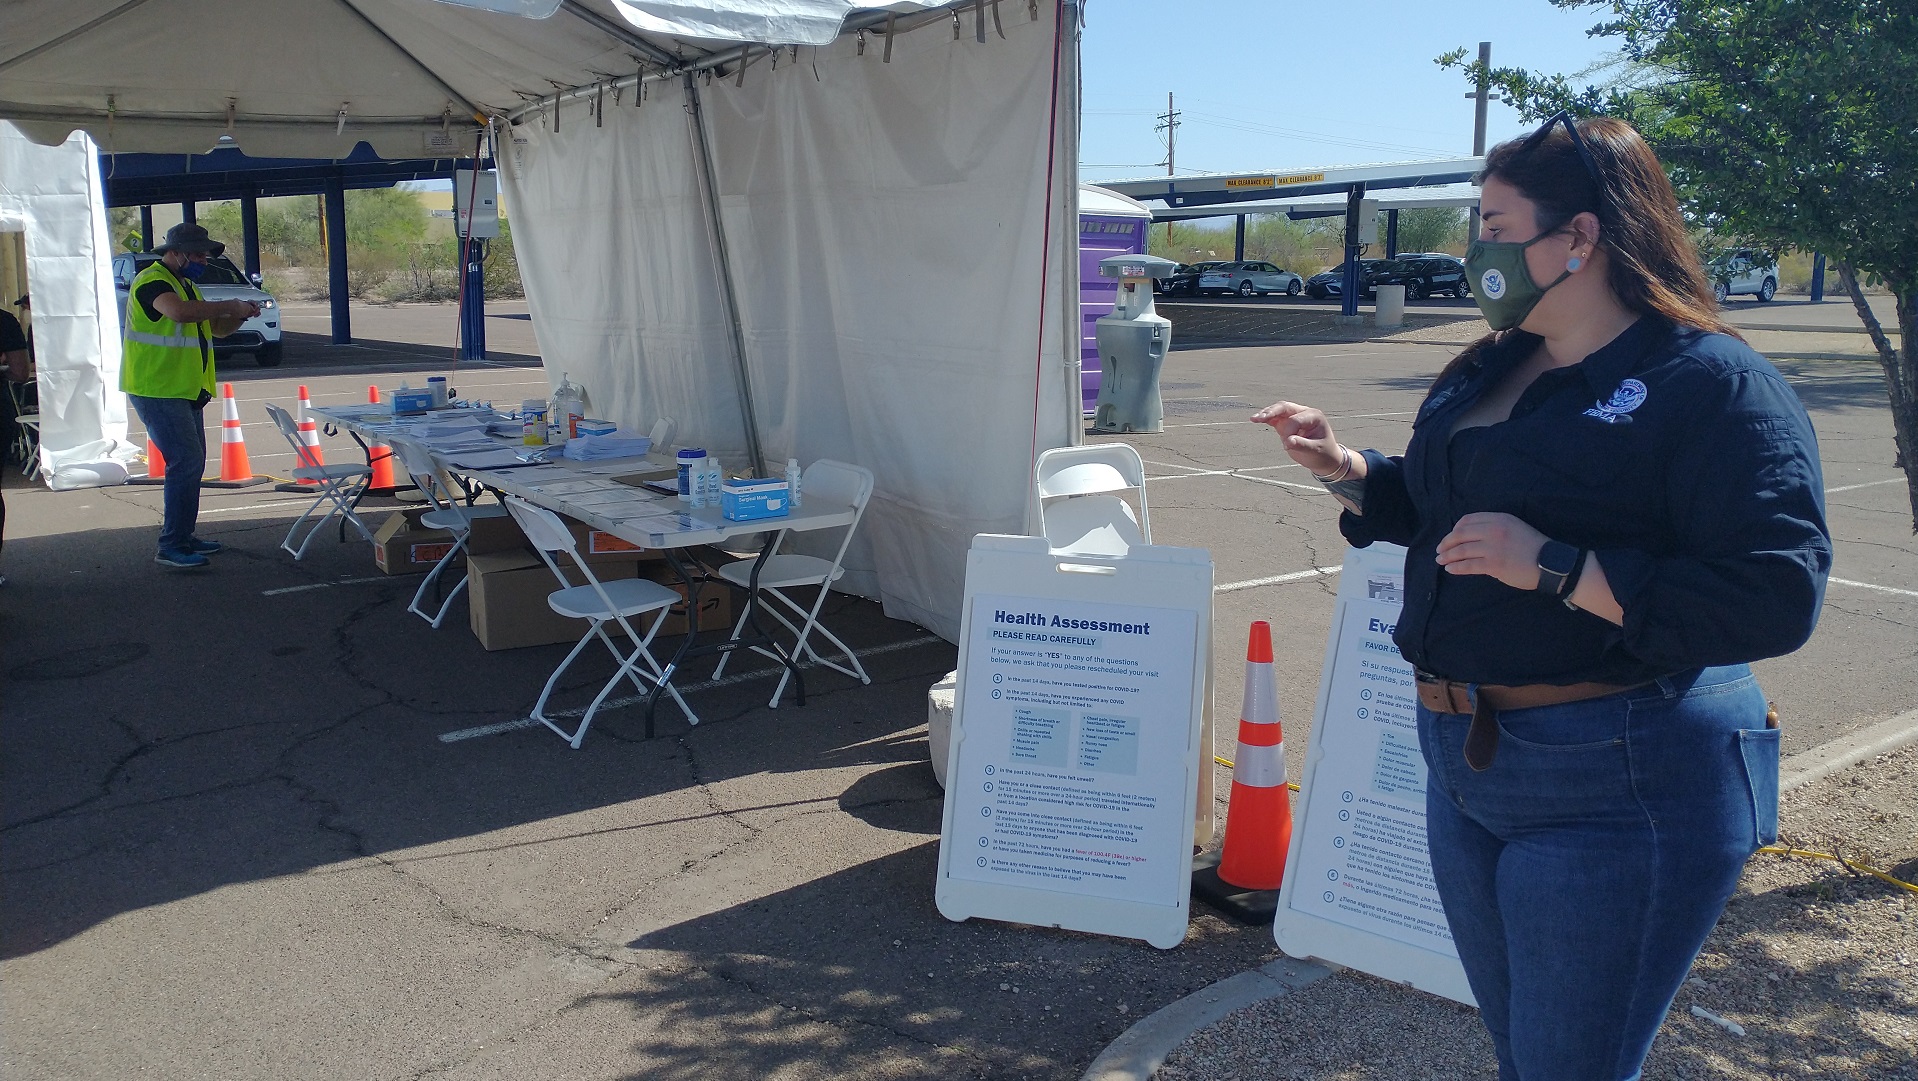 FEMA Operations Section Chief Mellisa Boudrye explains the workings of the registration area of a vaccination site managed by her agency at Pima Community College on May 3, 2021.